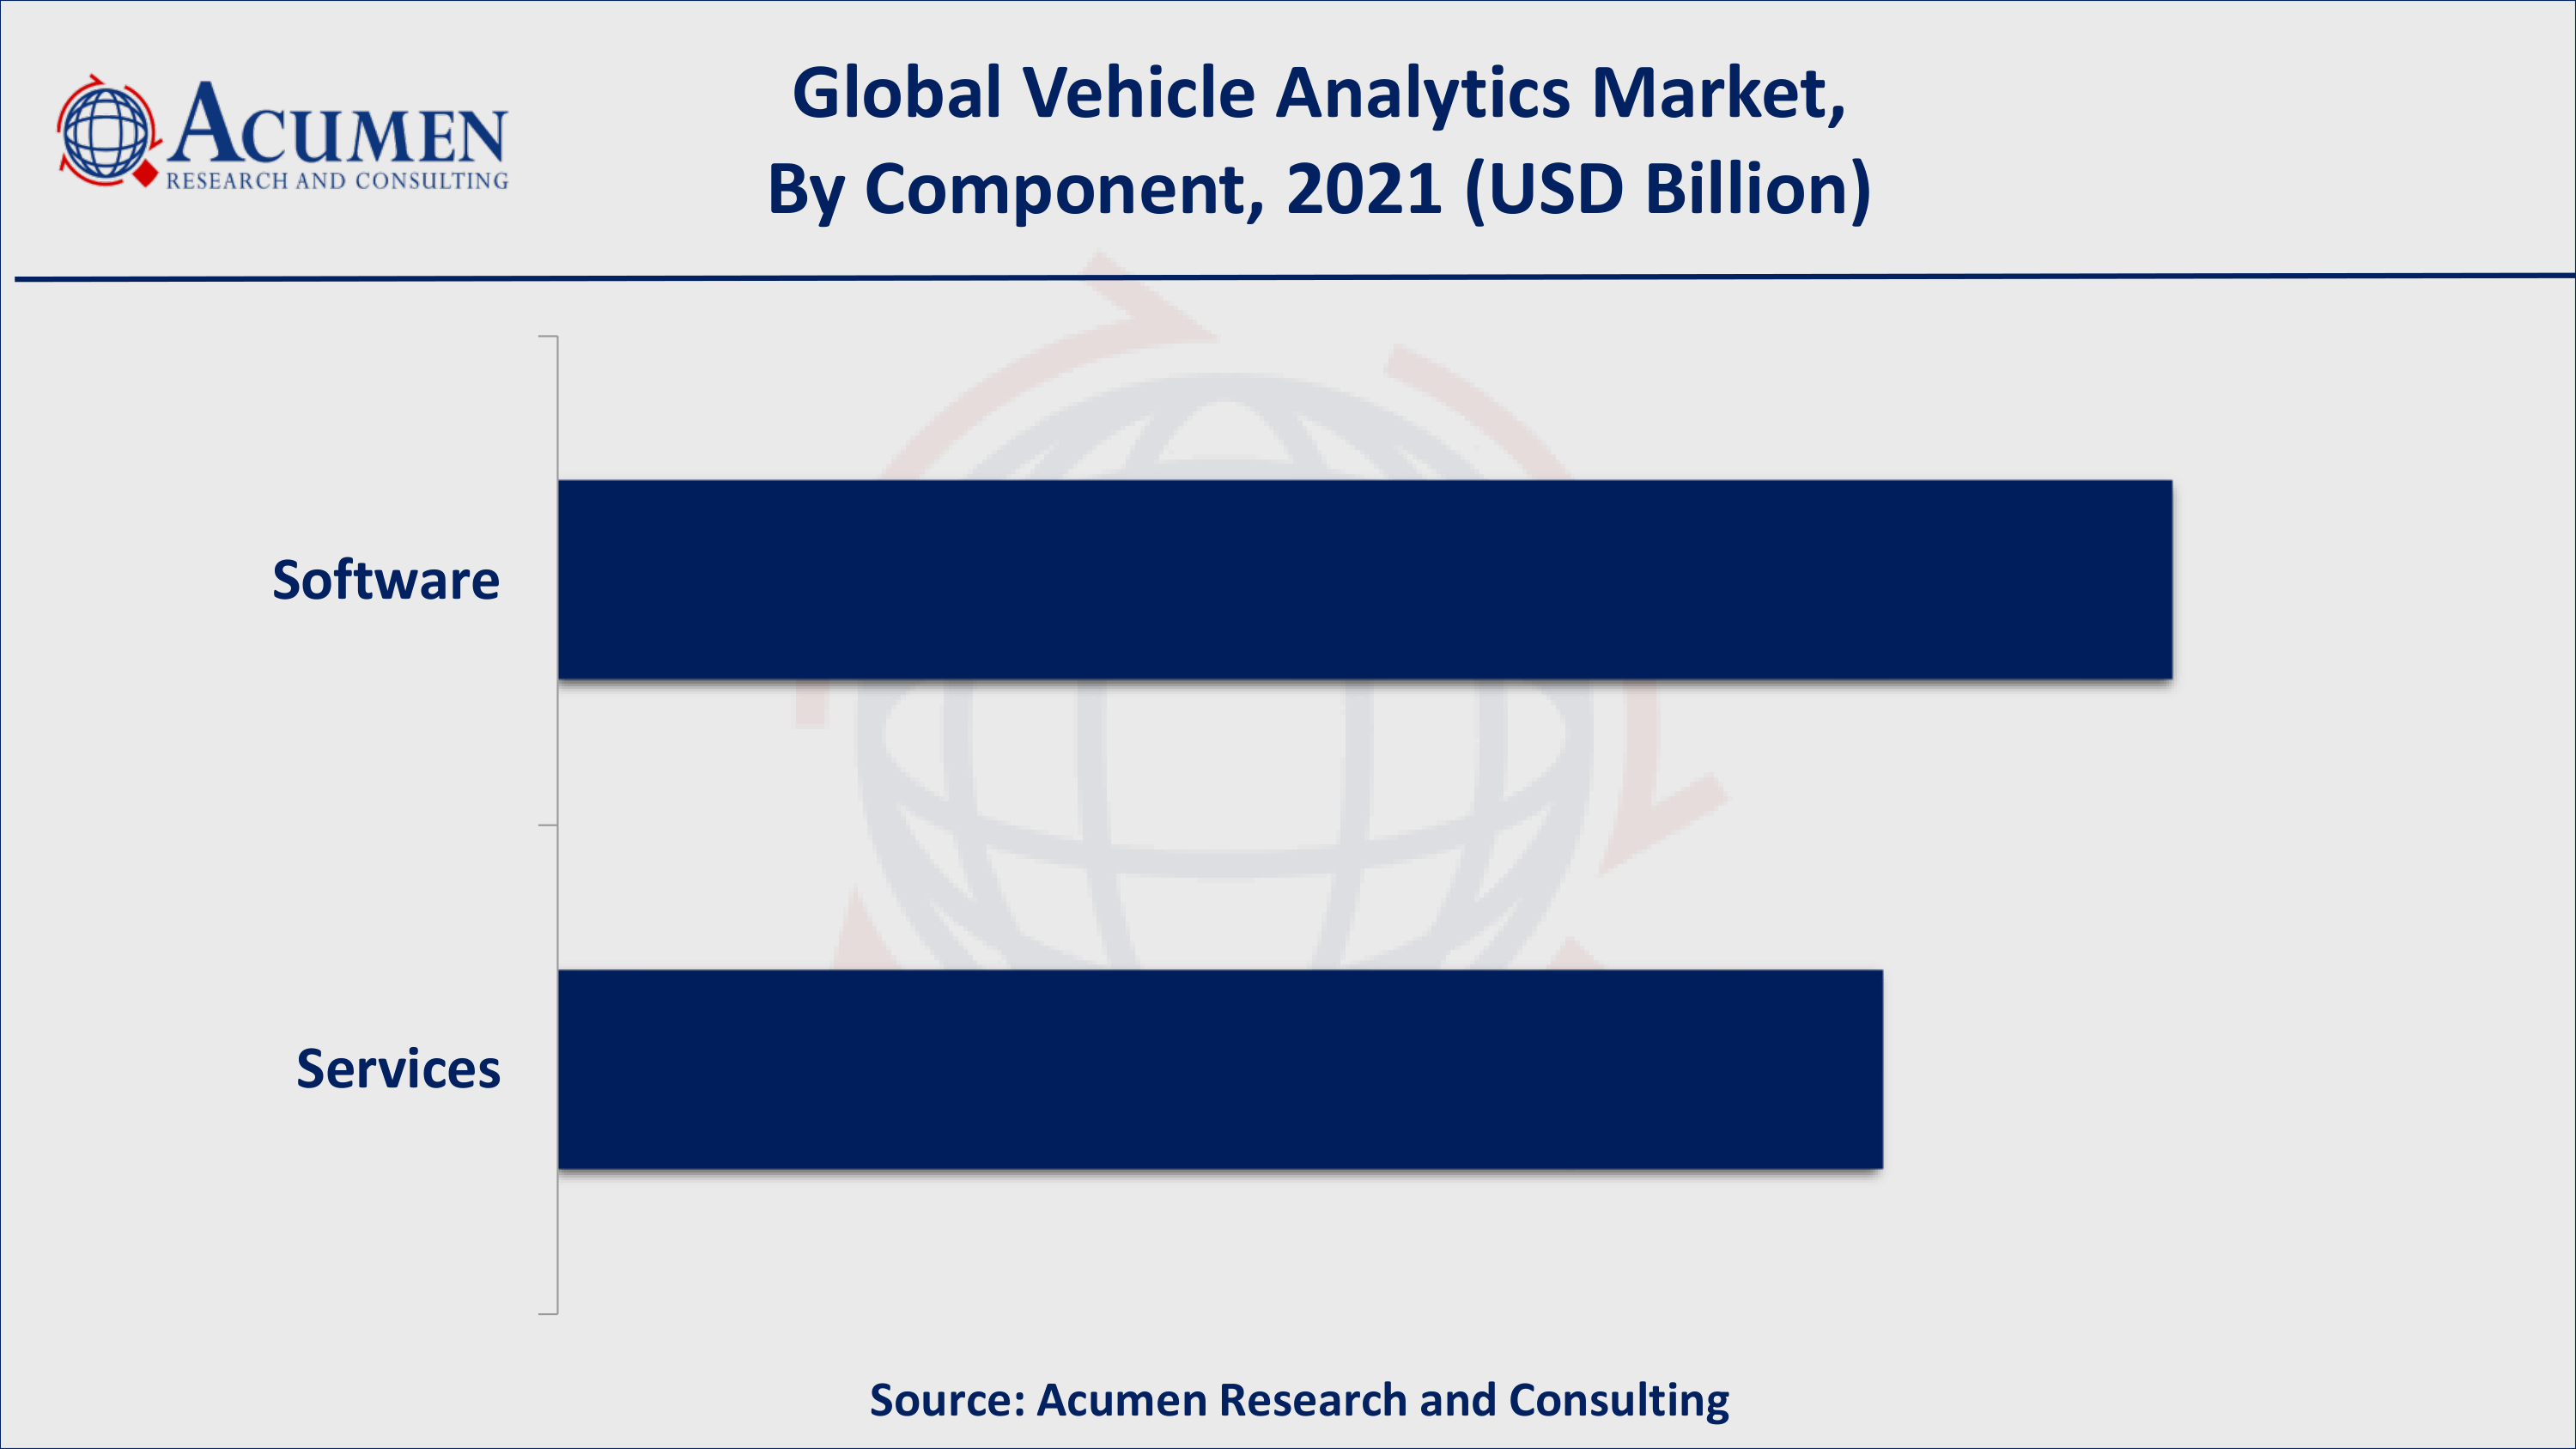 Based on component, software gathered over 55% of the overall market share in 2021